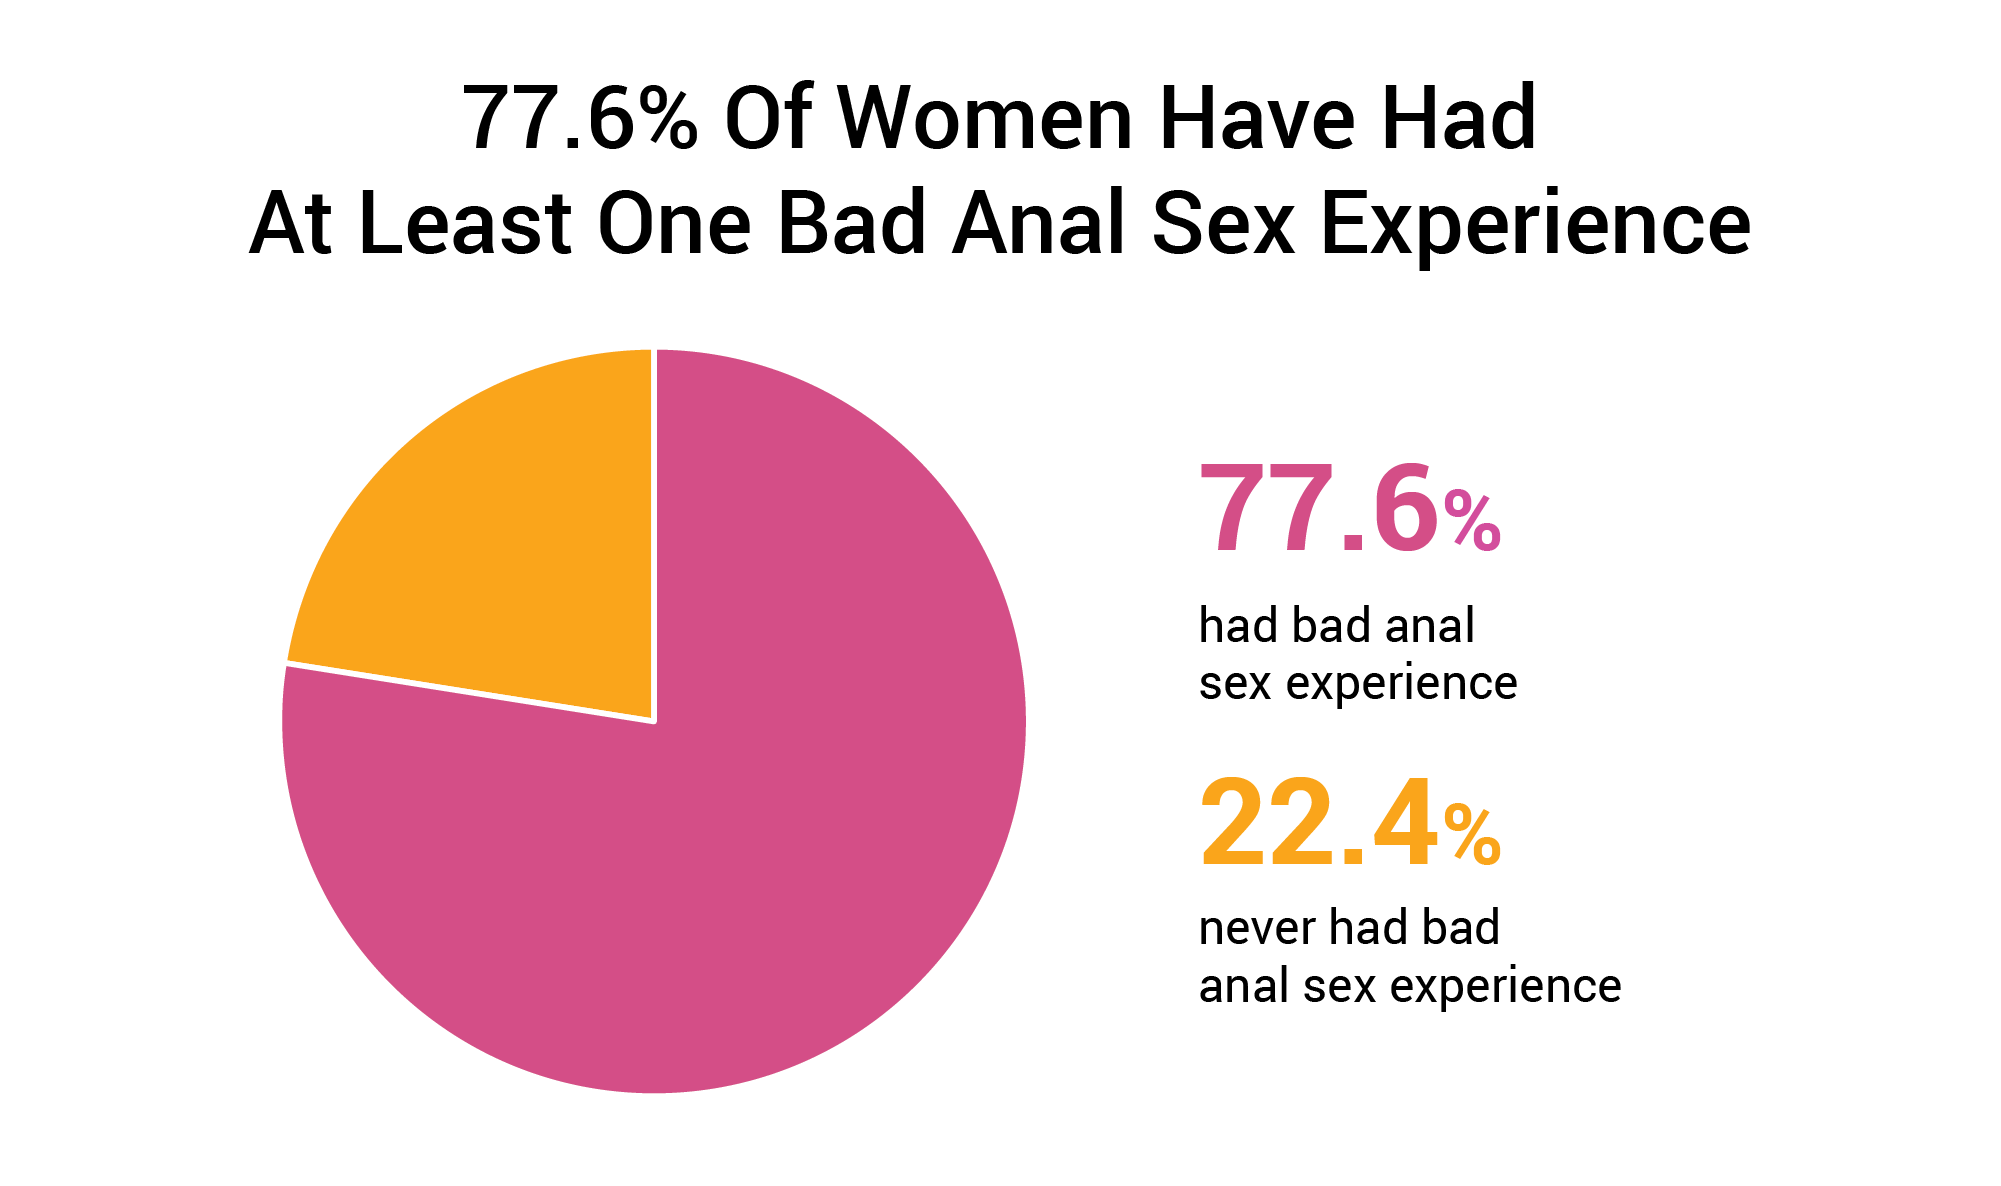 three quarters of women have had at least one bad anal sex experience